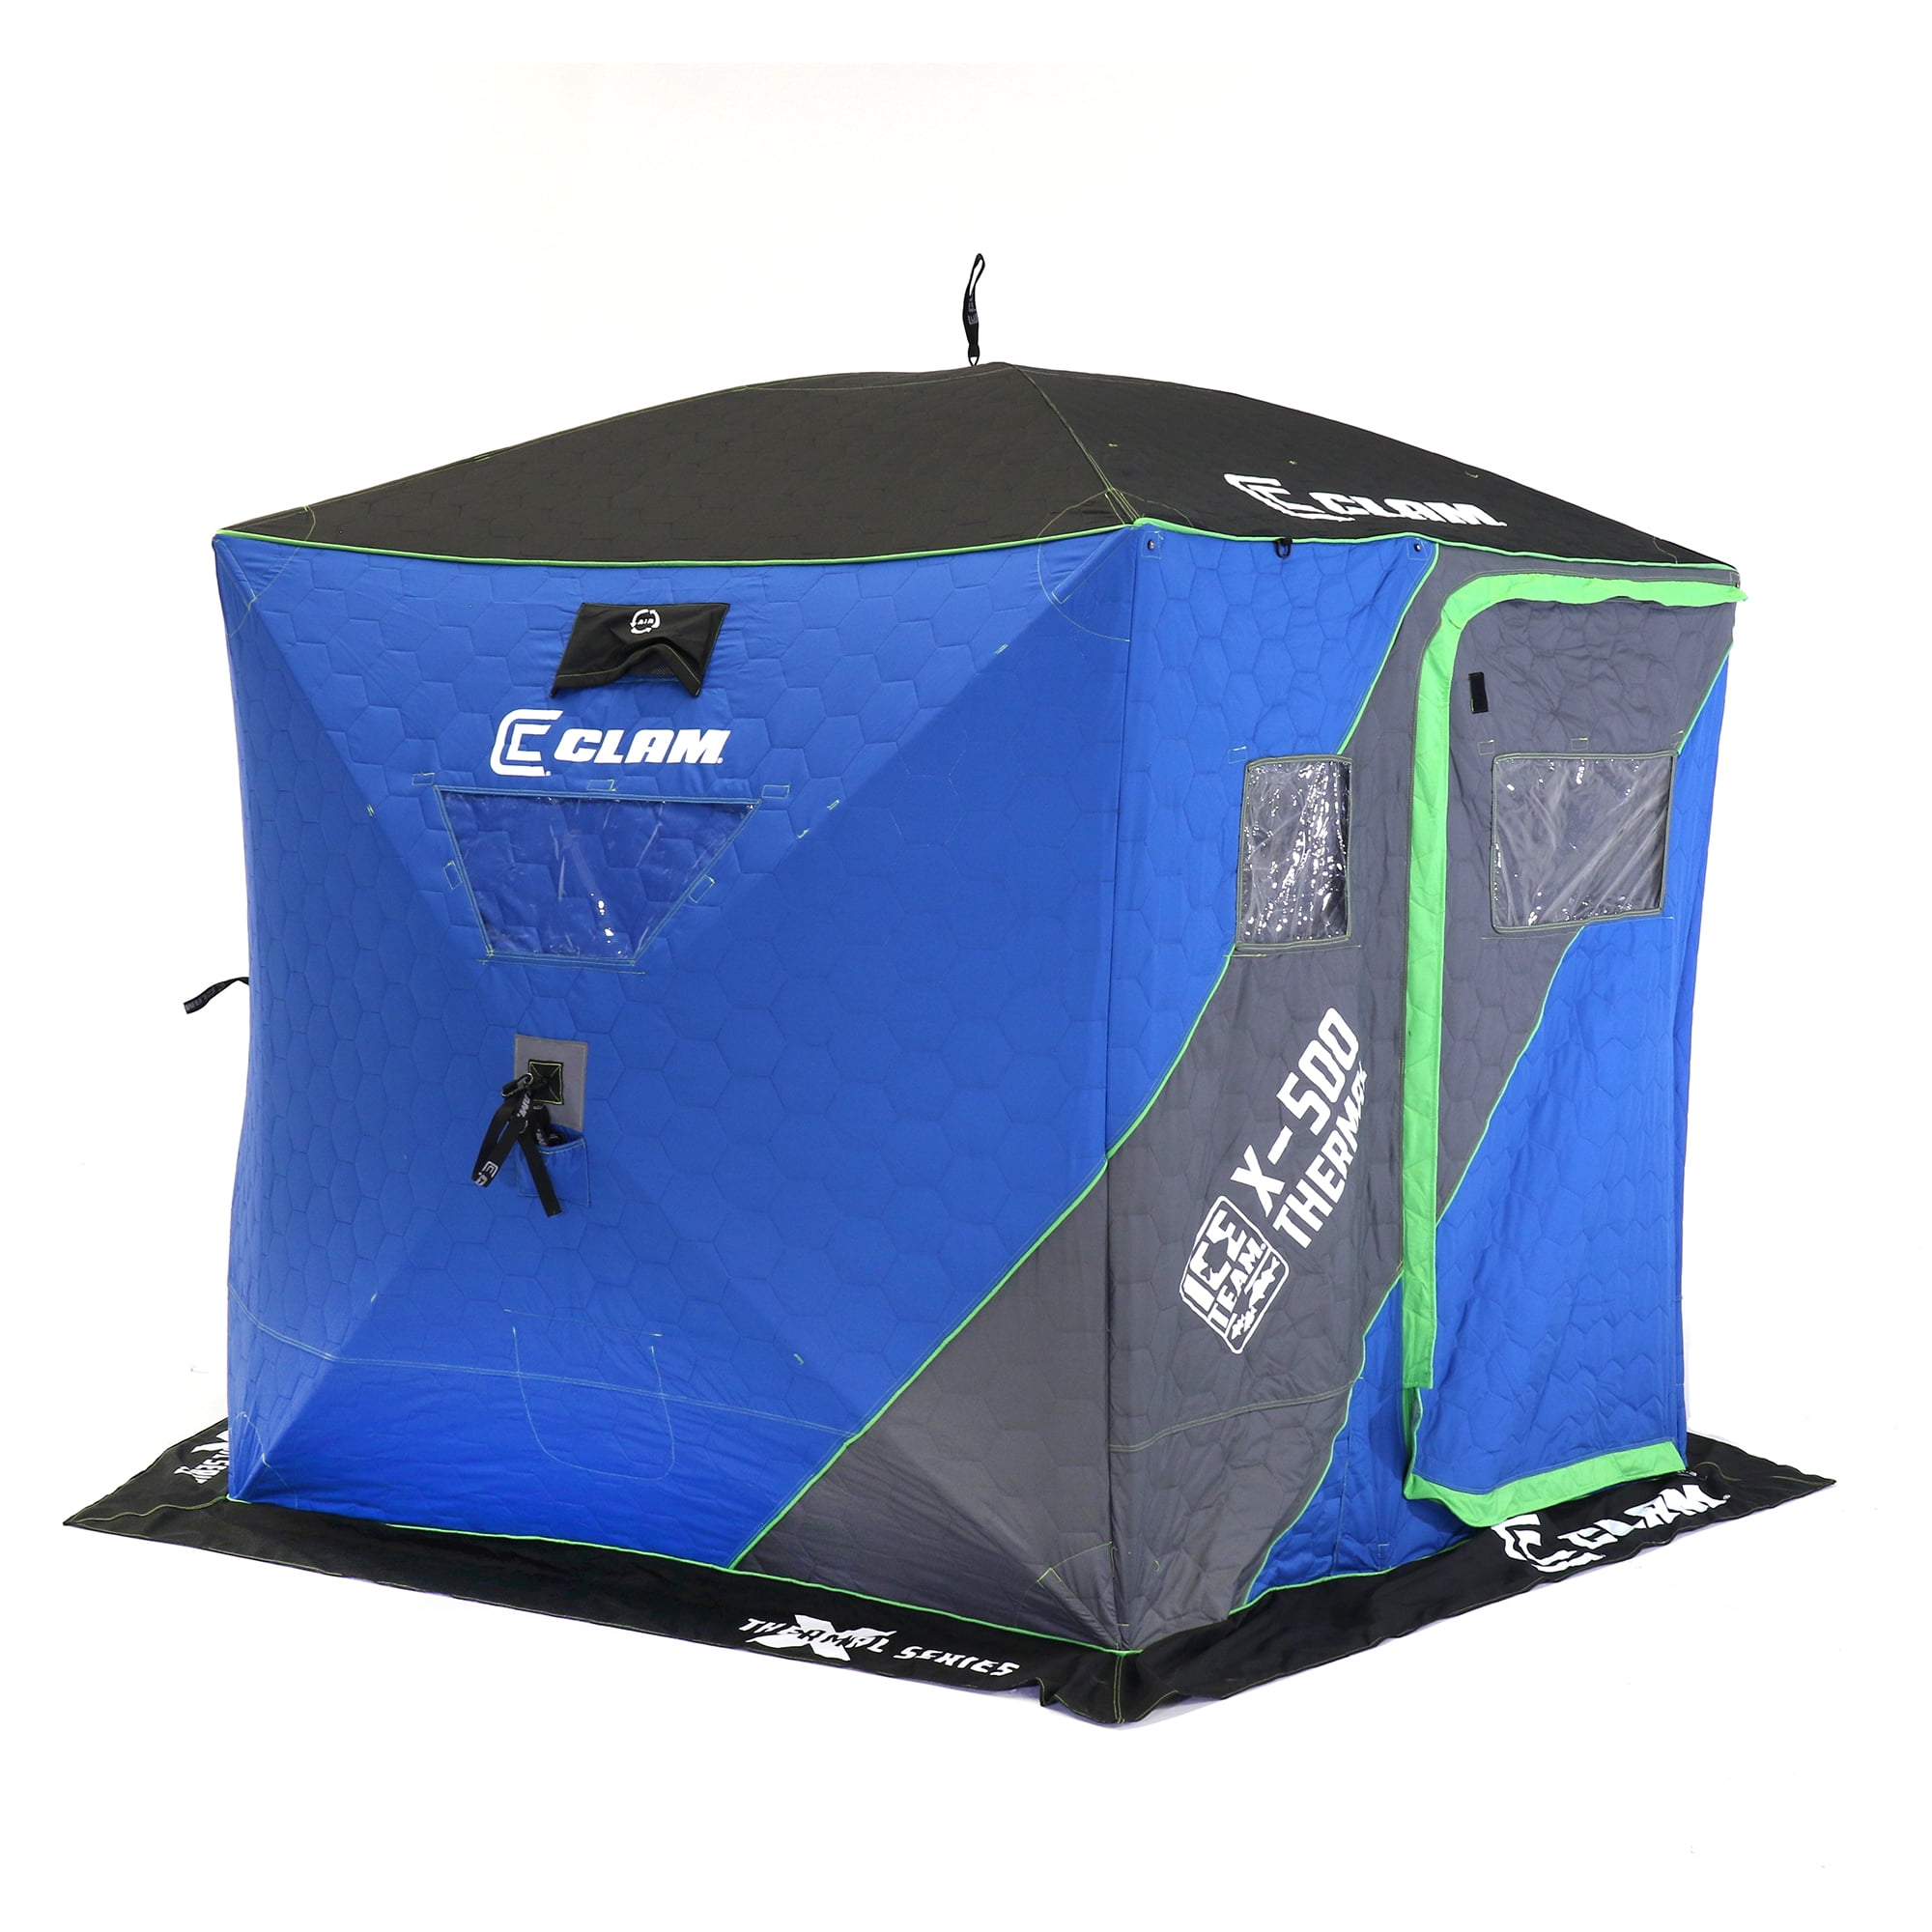 CLAM X-600 Portable 6 Person 11.5' Pop Up Ice Fishing Thermal Hub